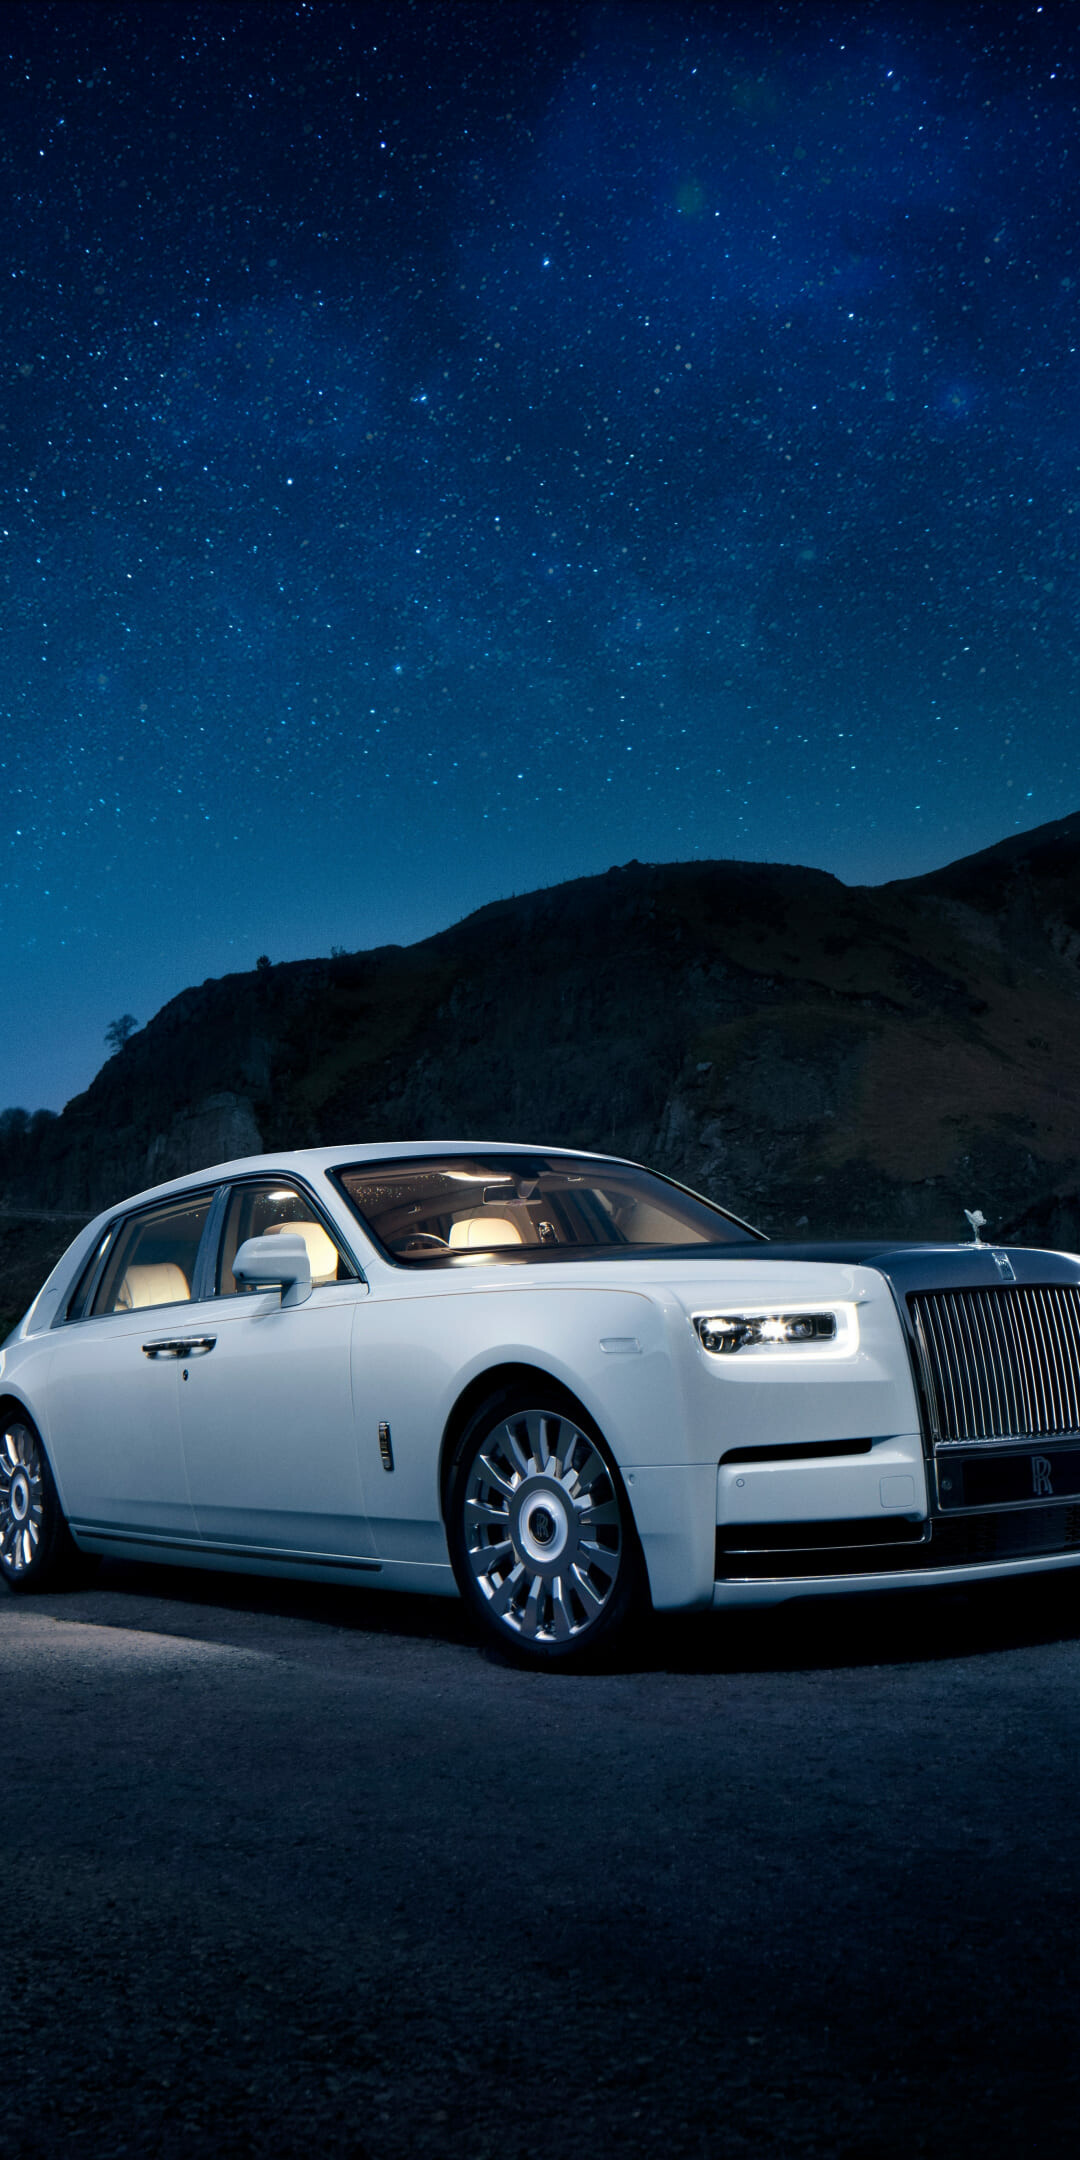 Rolls Royce wallpapers, High-quality images, Automotive artistry, Luxury on display, 1080x2160 HD Phone